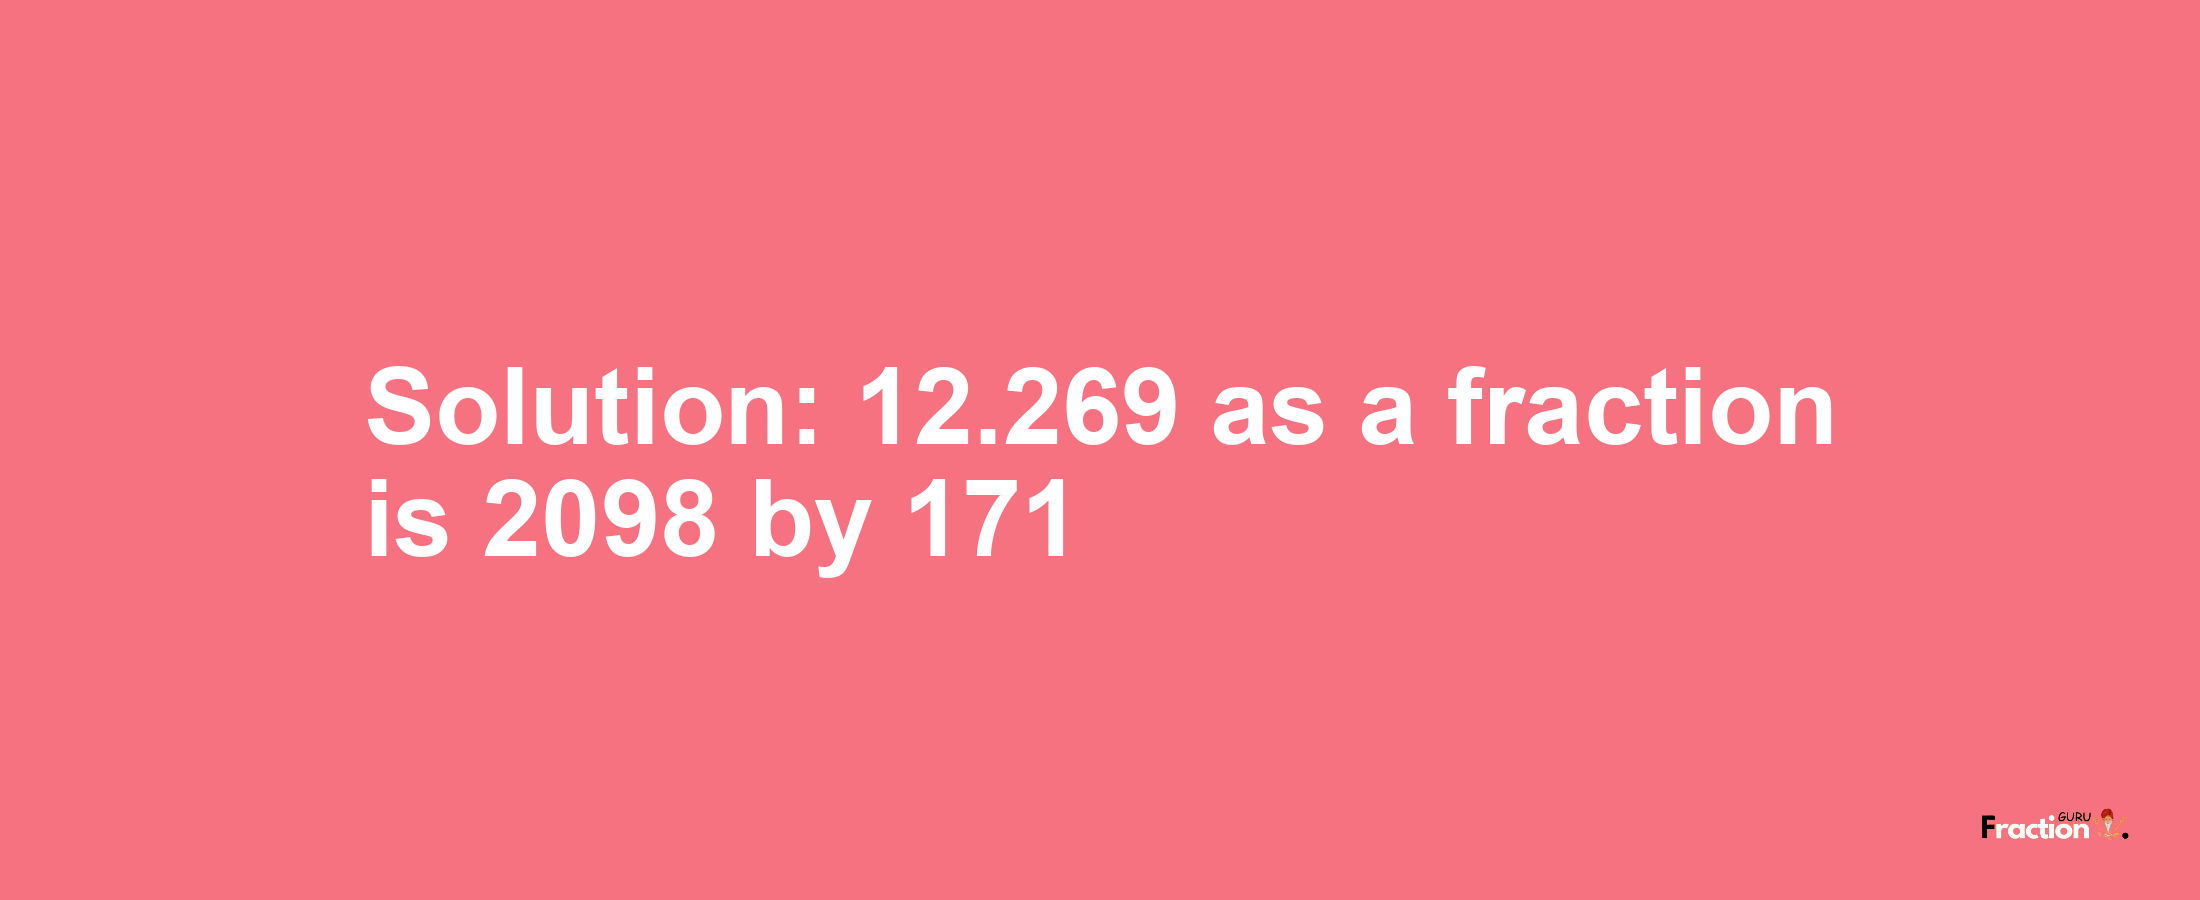 Solution:12.269 as a fraction is 2098/171